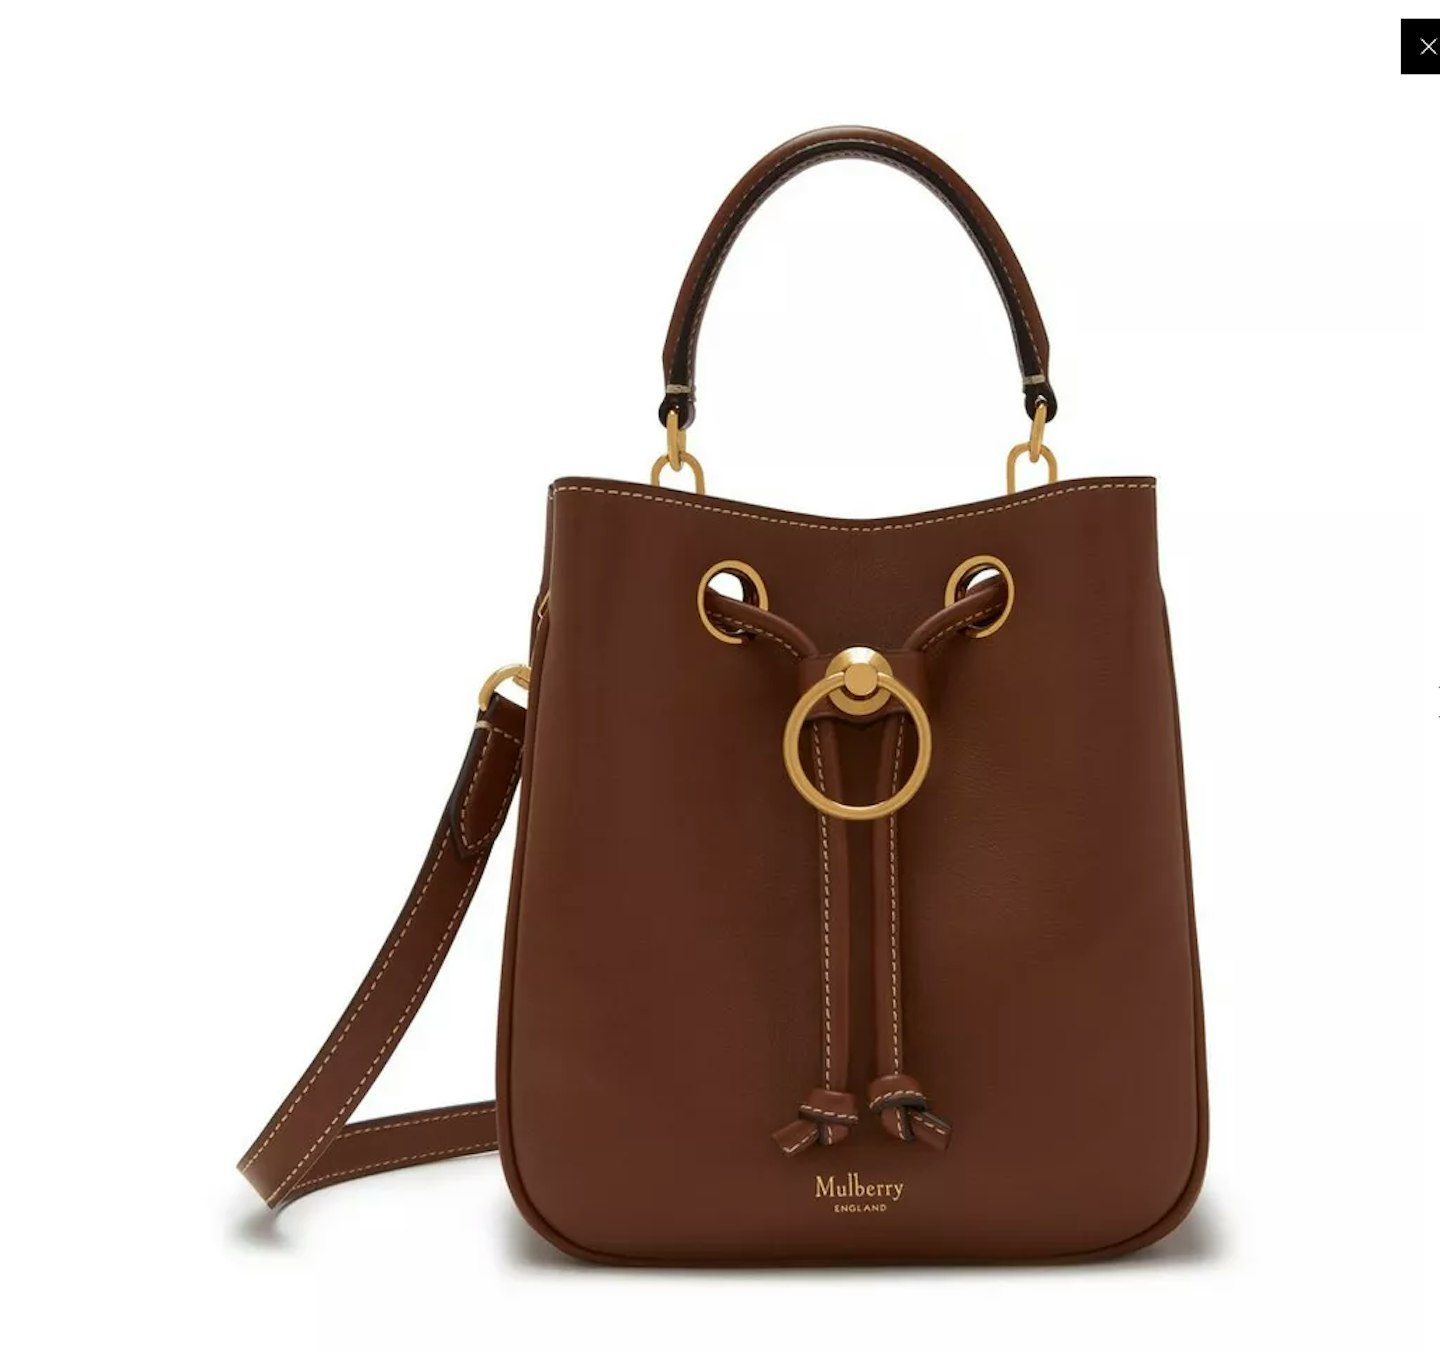 Mulberry, Hampstead Bag, £895